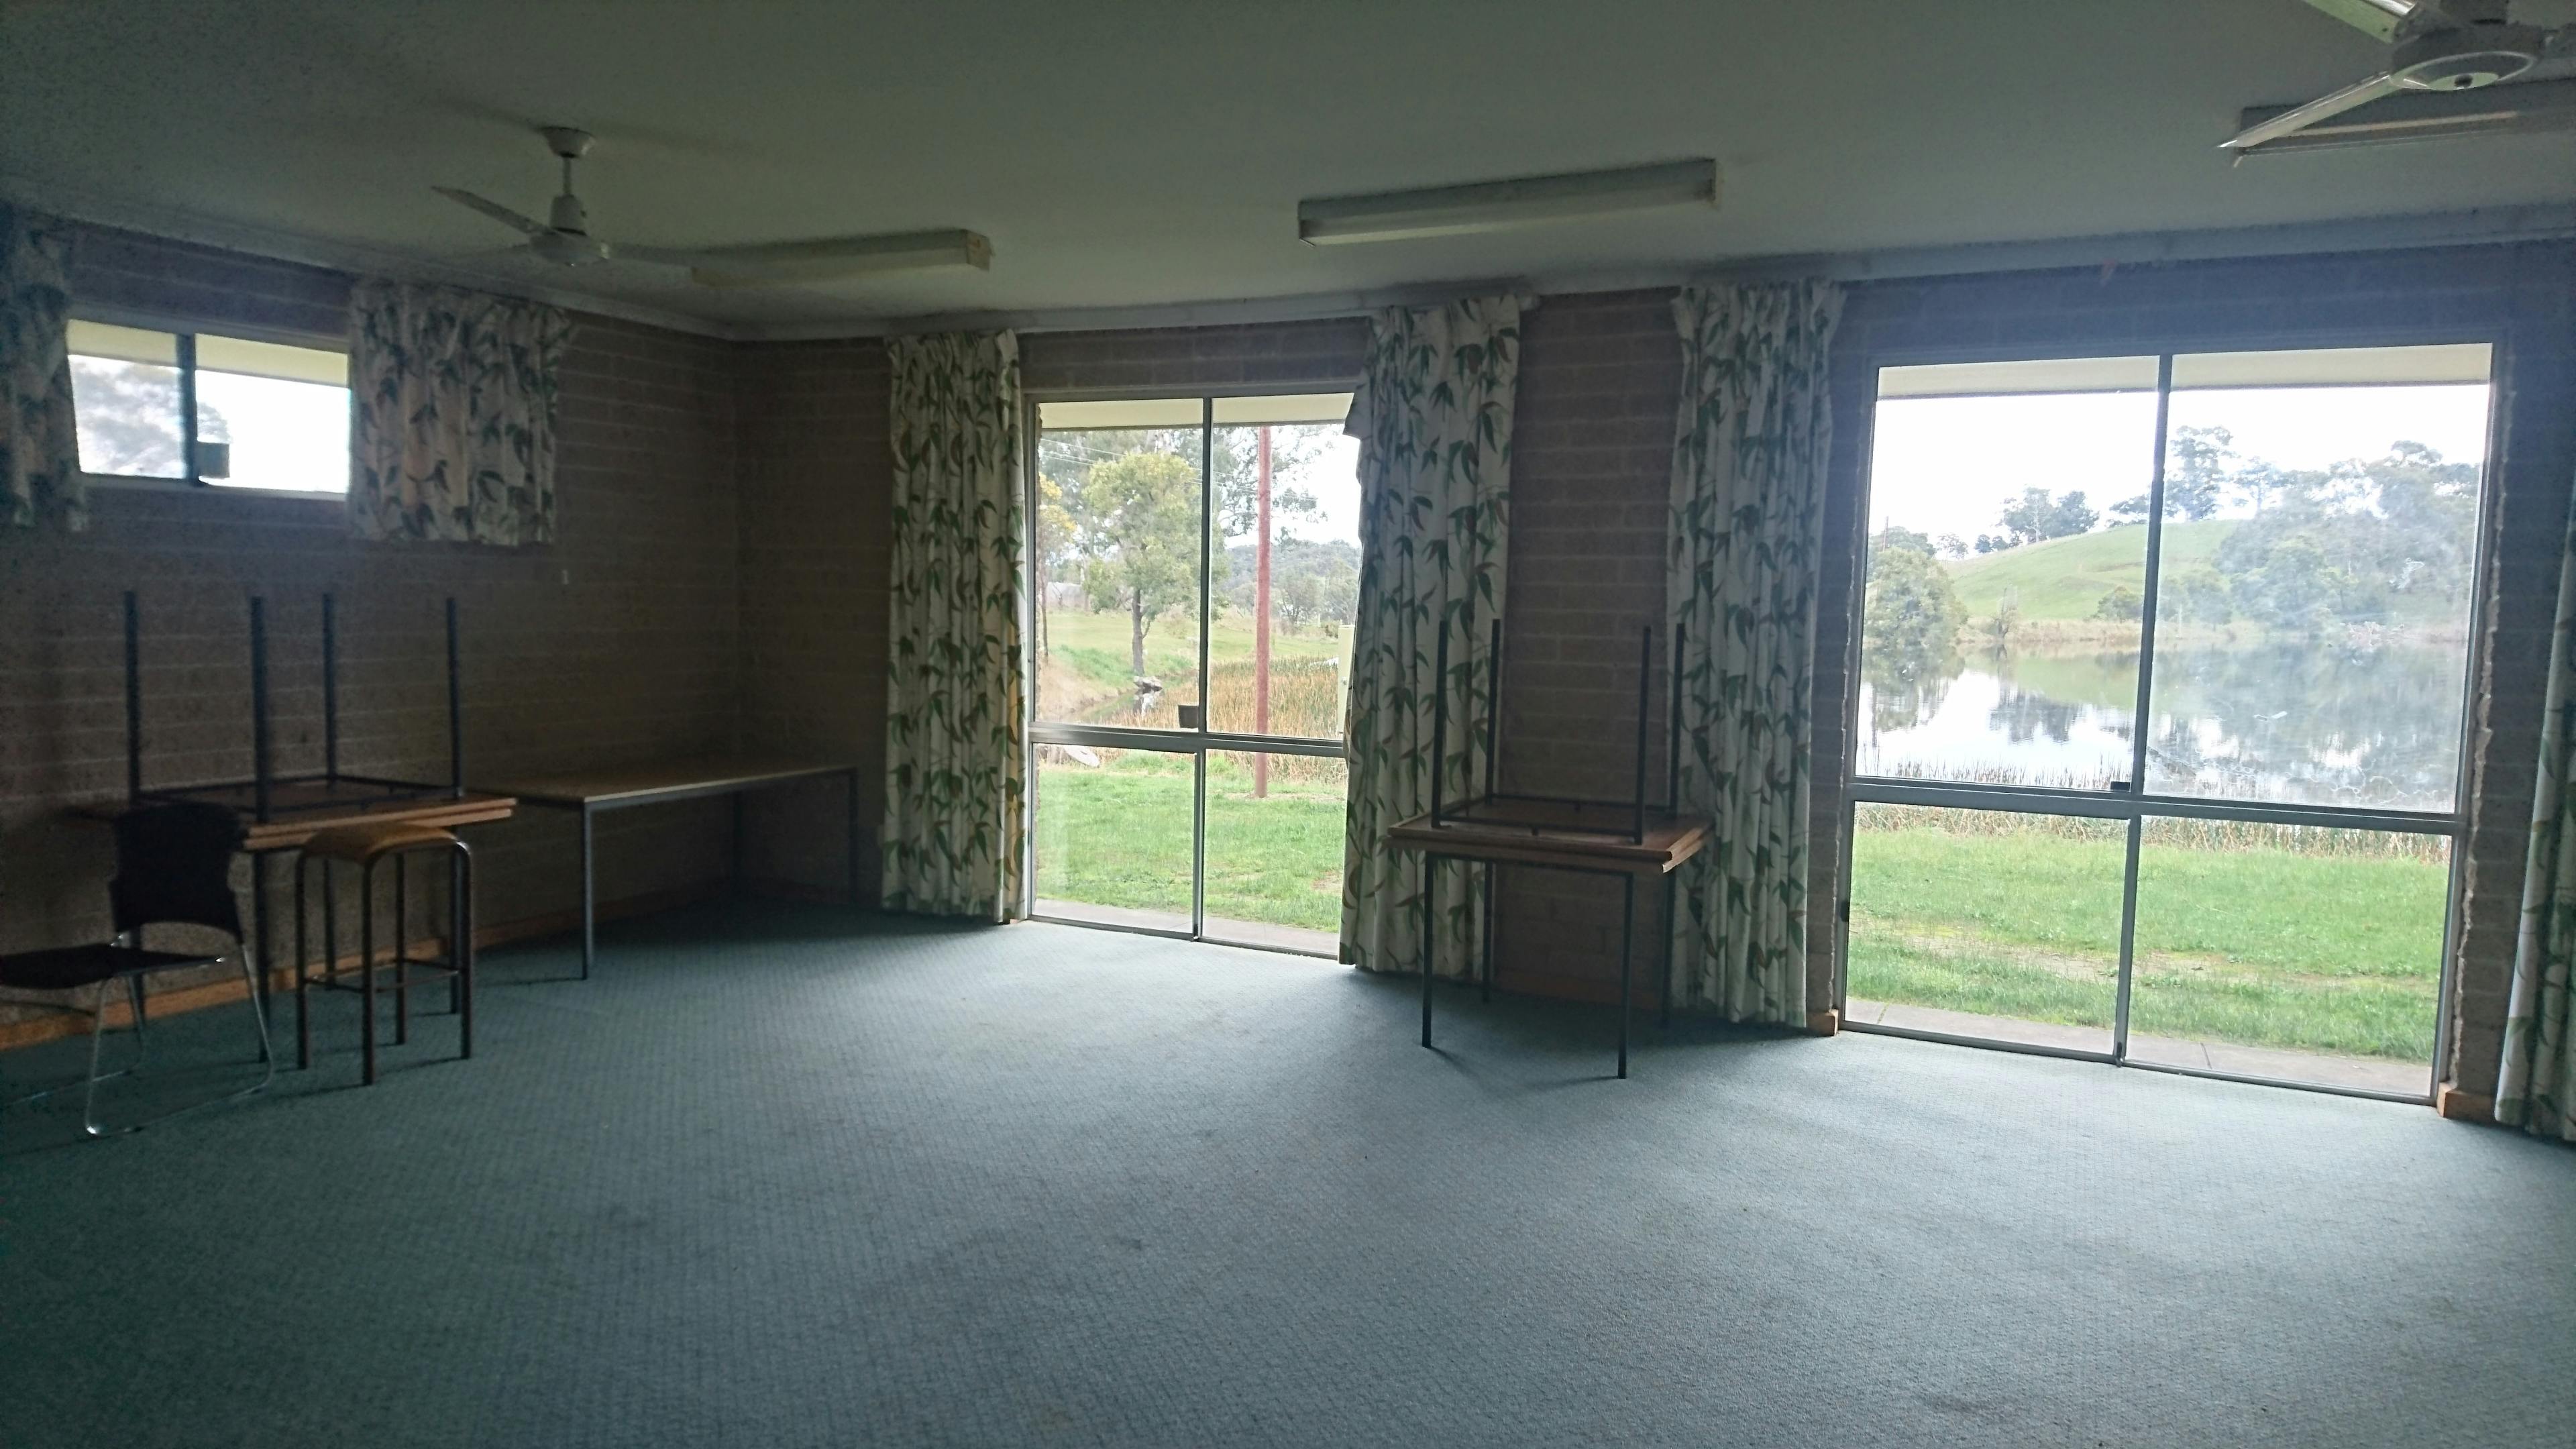 The community room looking out on the Southern Reservoir